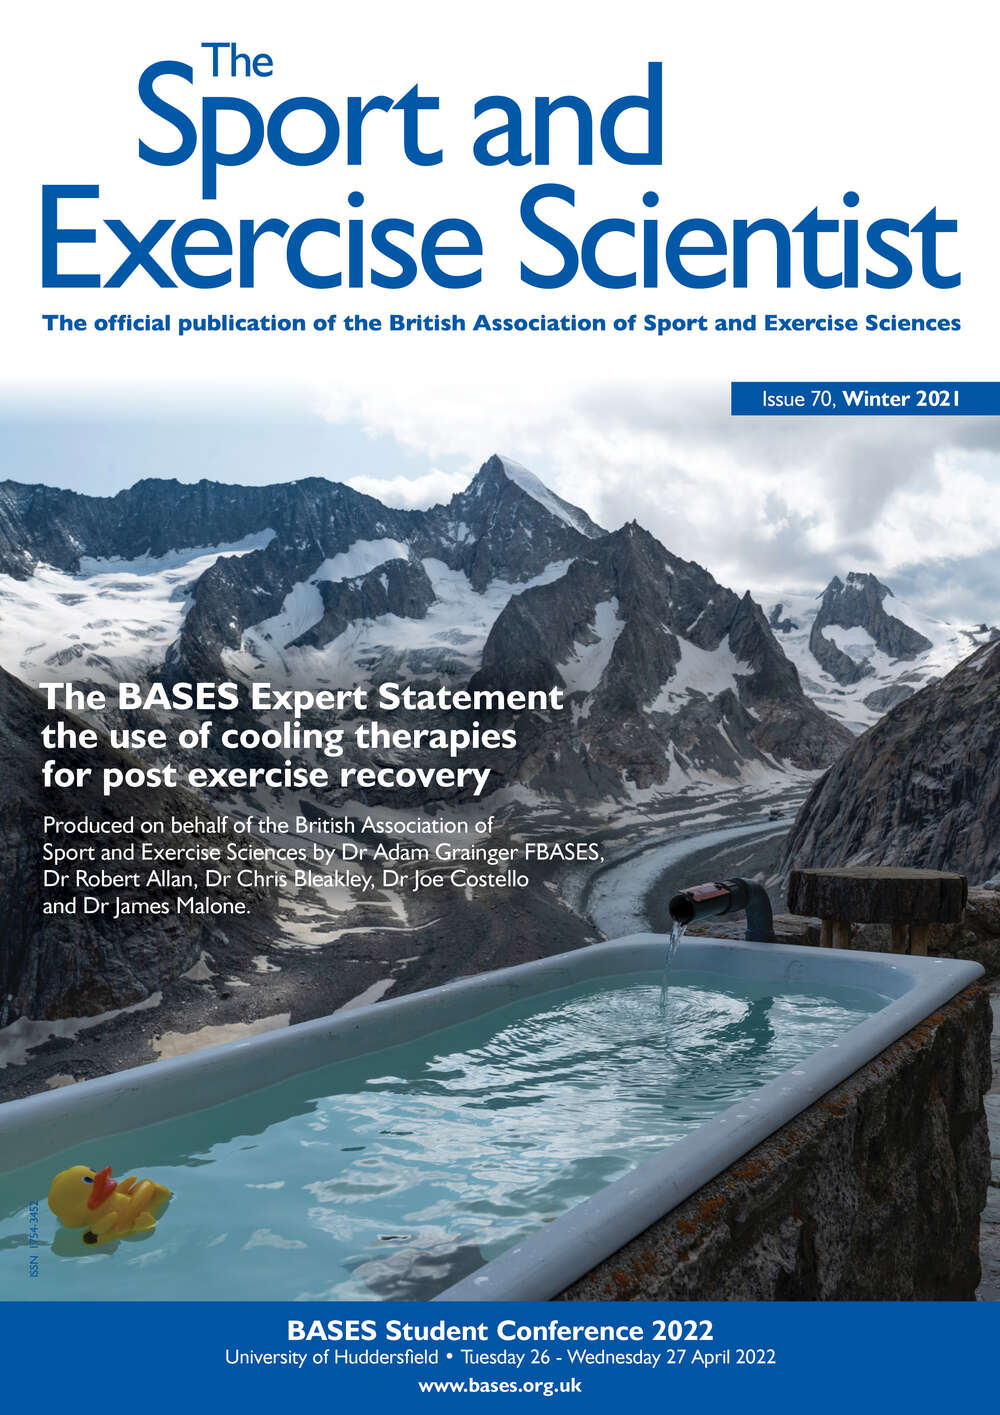 Winter 2021 edition of TSES now available